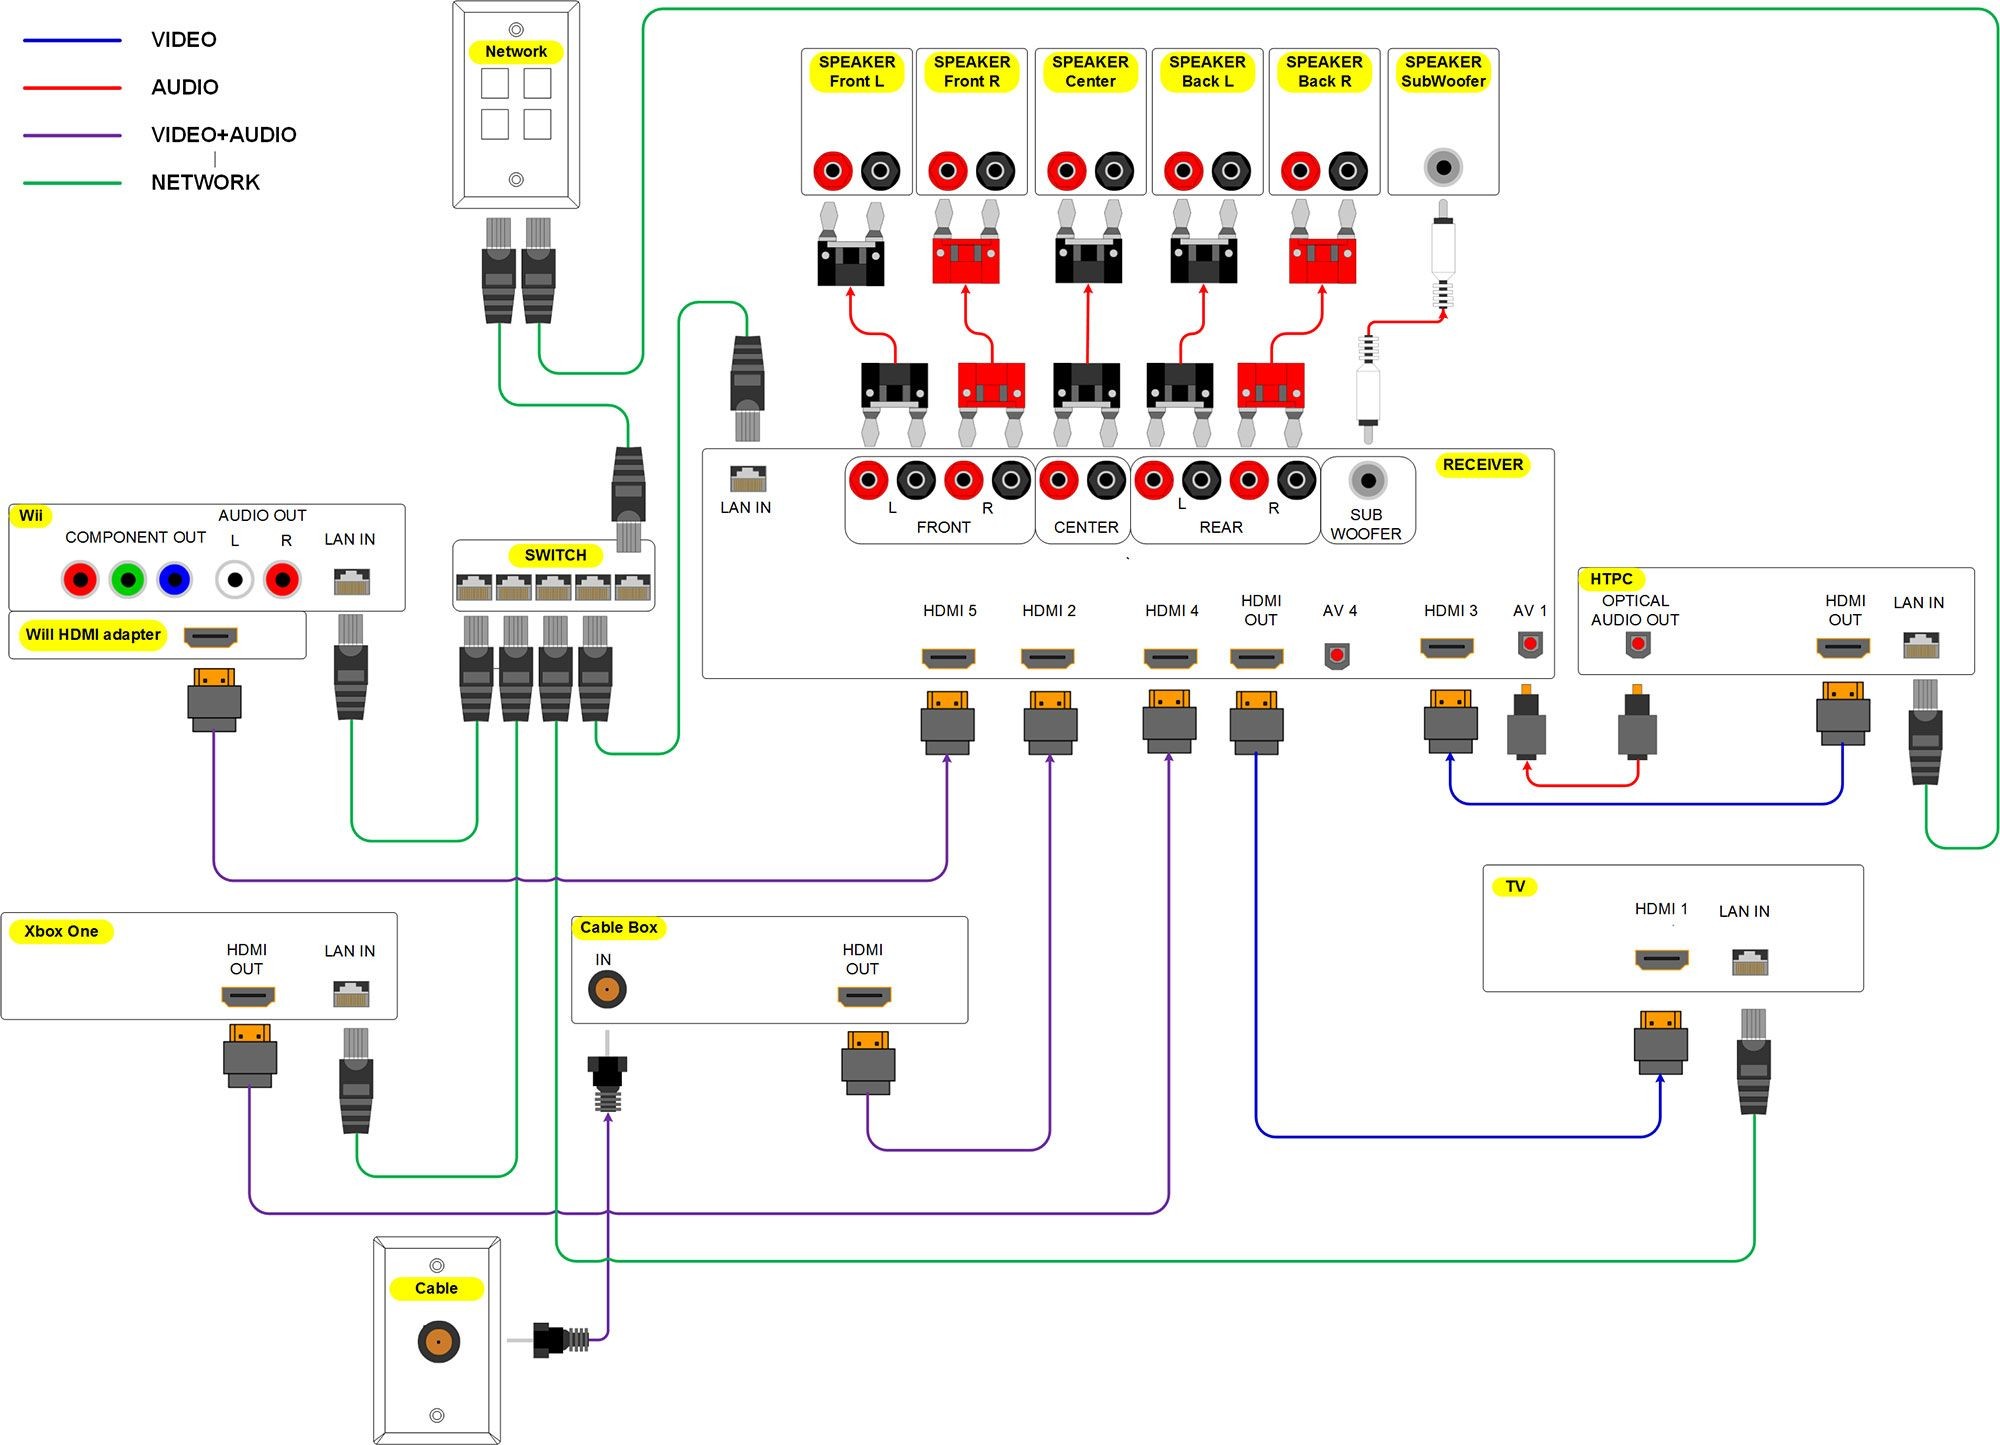 Home Theater Wiring Diagram click it to see the big 2000 pixel wide